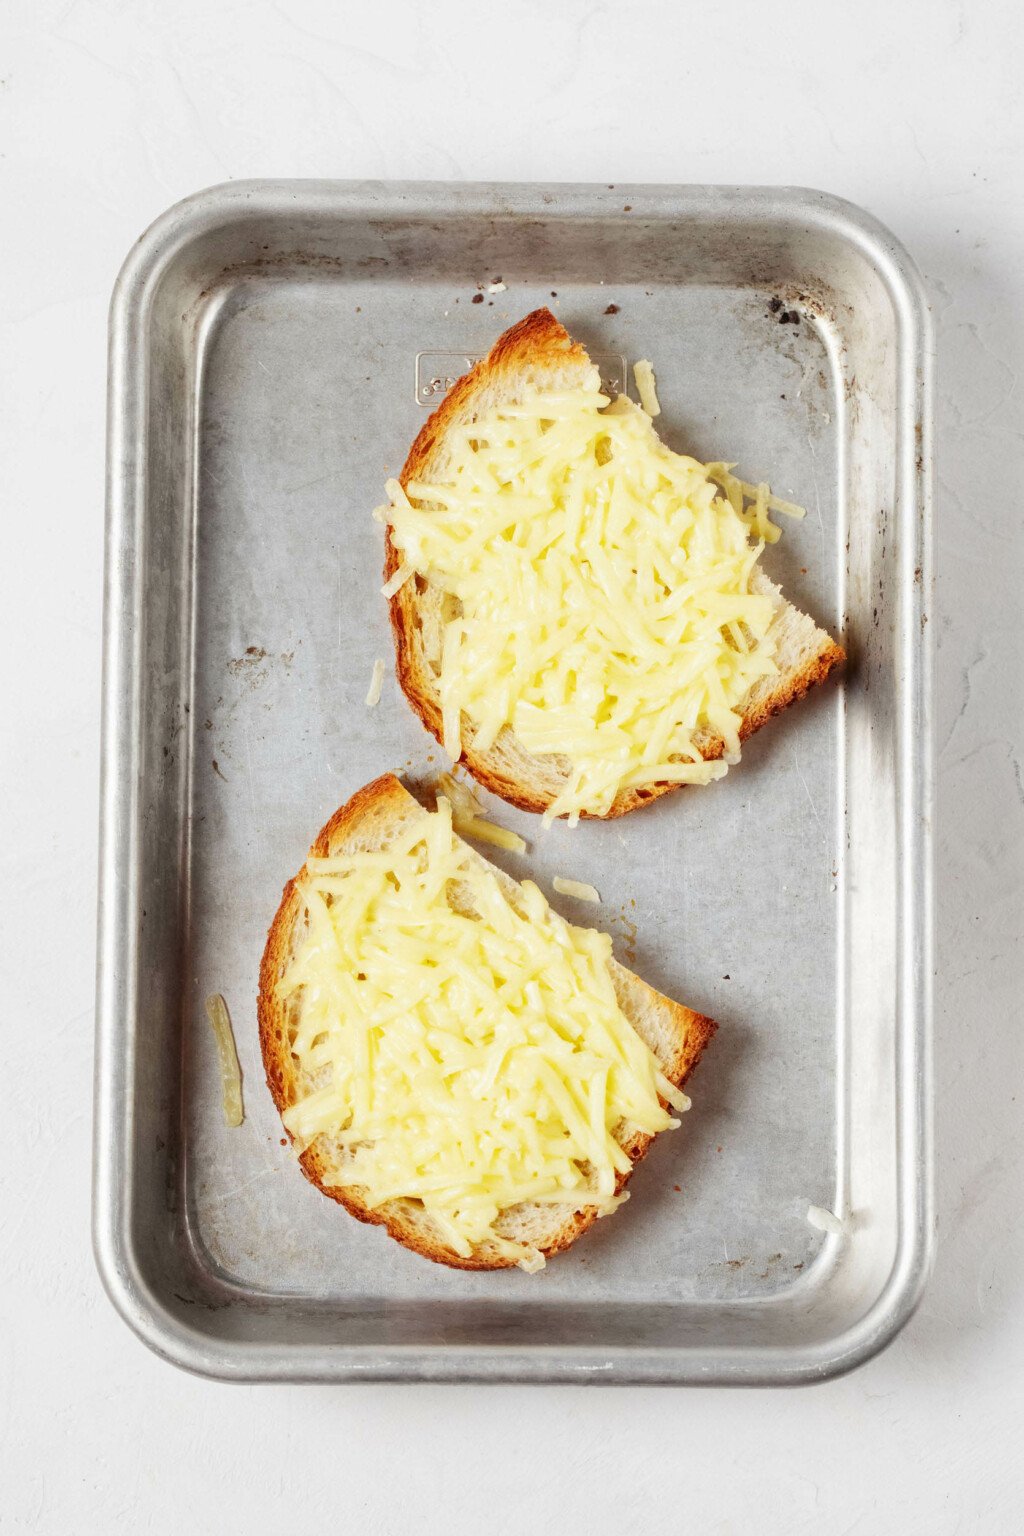 An overhead image of toasted bread with melted, plant-based "cheese" on top.